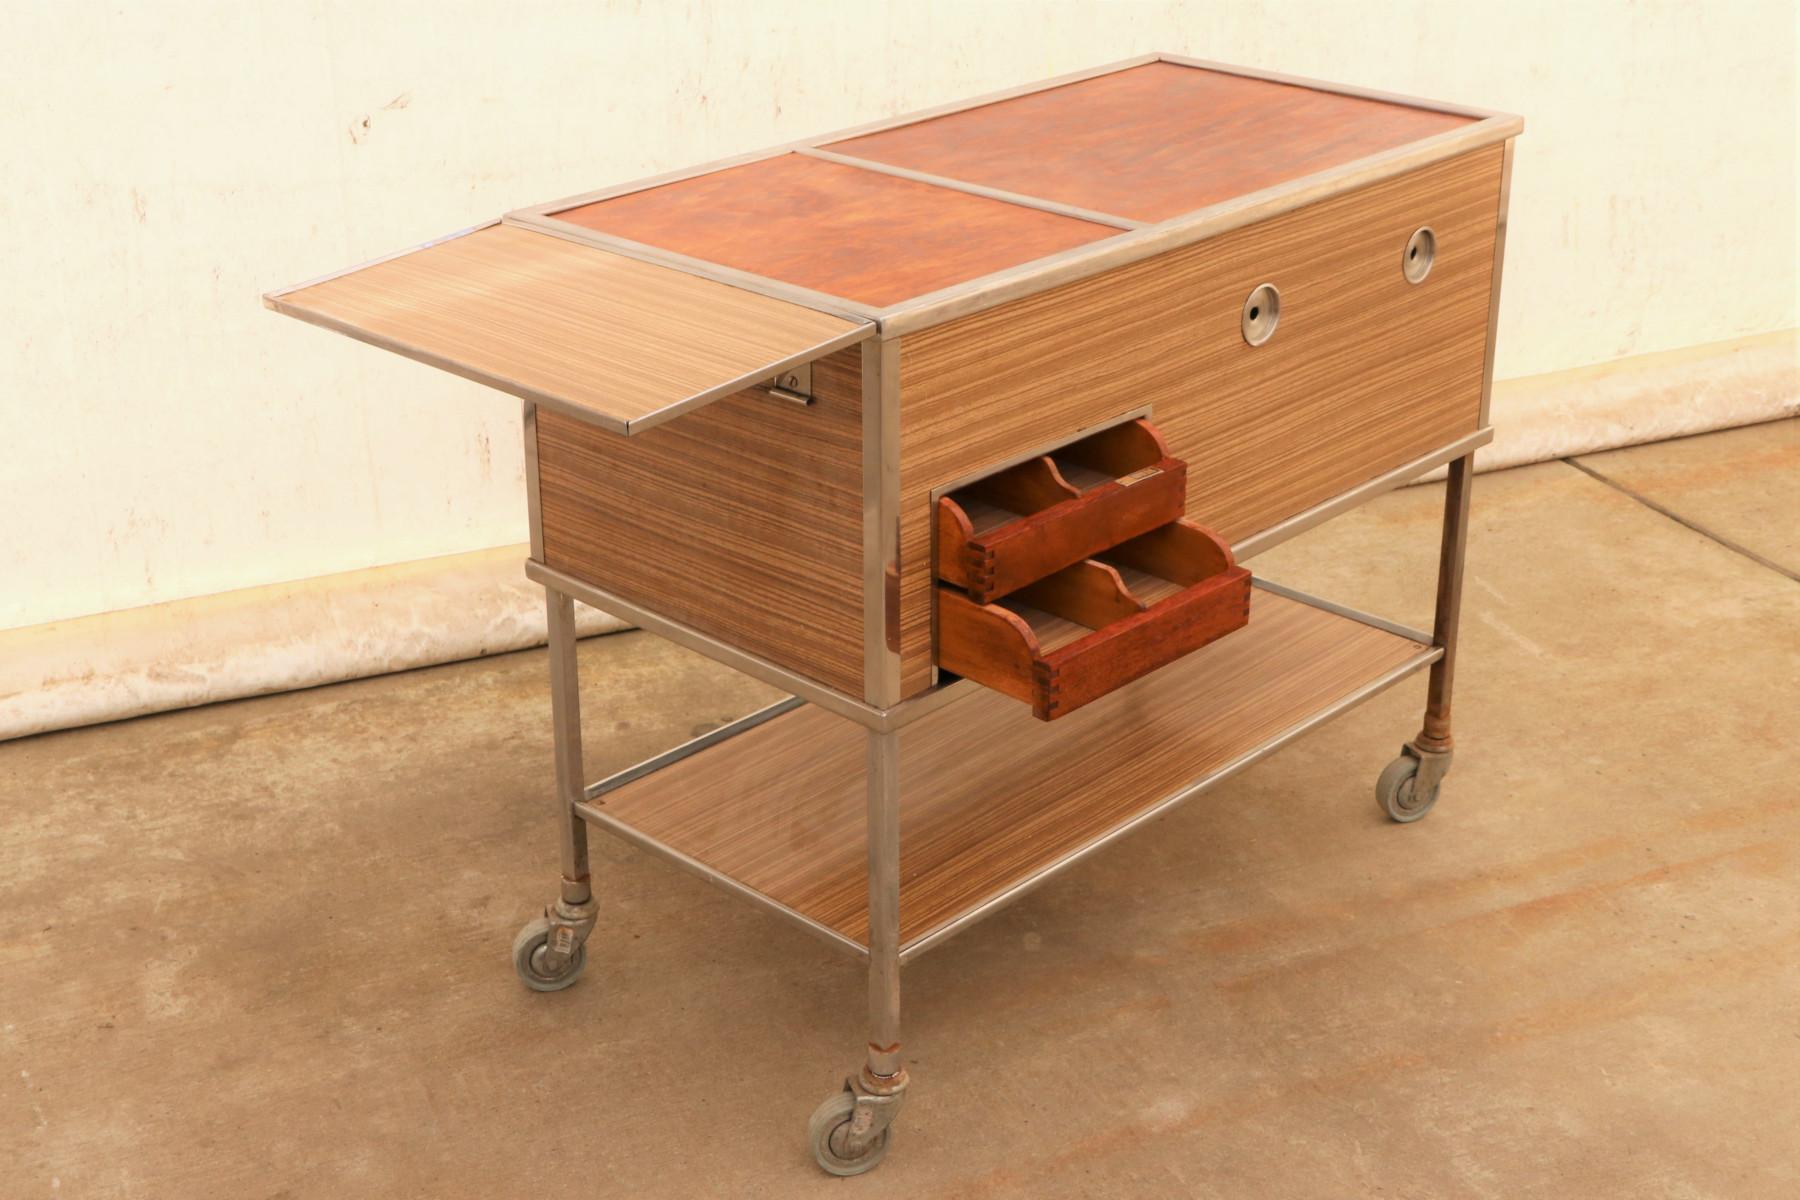 Czechoslovak Industrial Kitchen Serving Trolley on Wheels from the 1970s For Sale 1